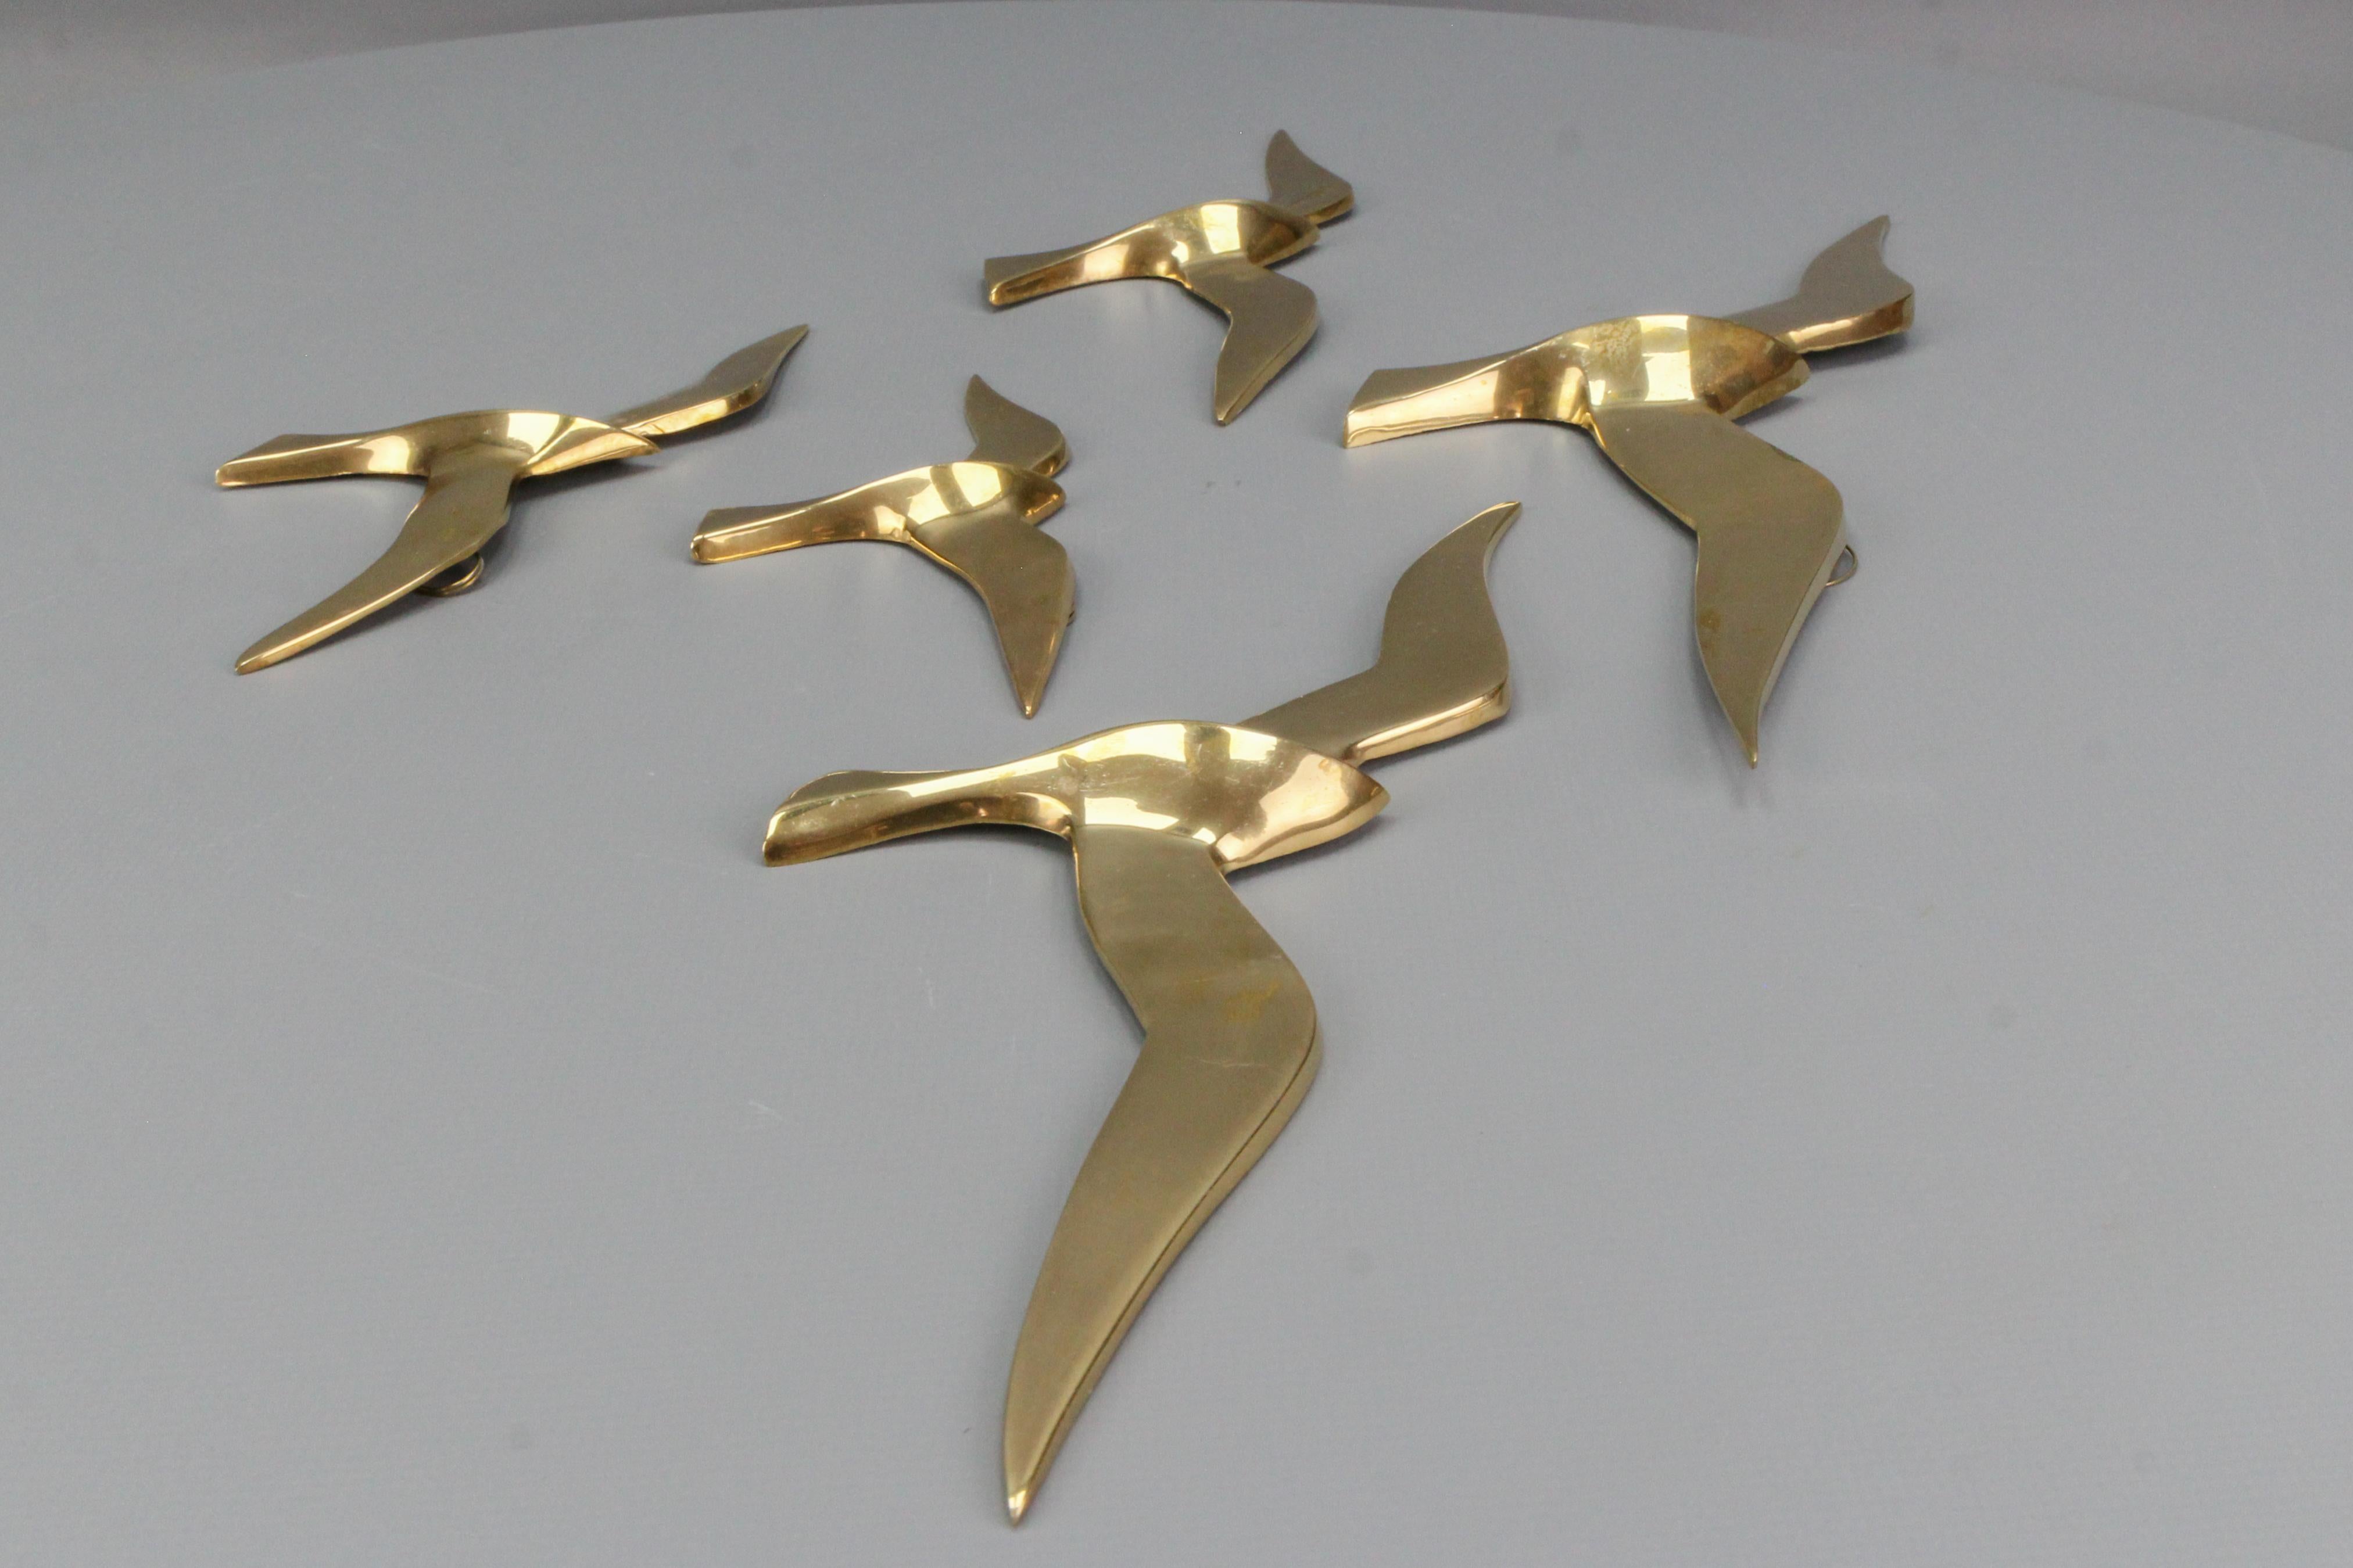 A beautiful Mid-Century Modern bird wall decoration - seagull figures made of brass, set of five, from circa the 1970s.
The dimensions of the largest bird figure: 
Dimensions: height: 12 cm / 4.72 in; width: 34 cm / 13.38 in; depth: 3 cm / 1.18